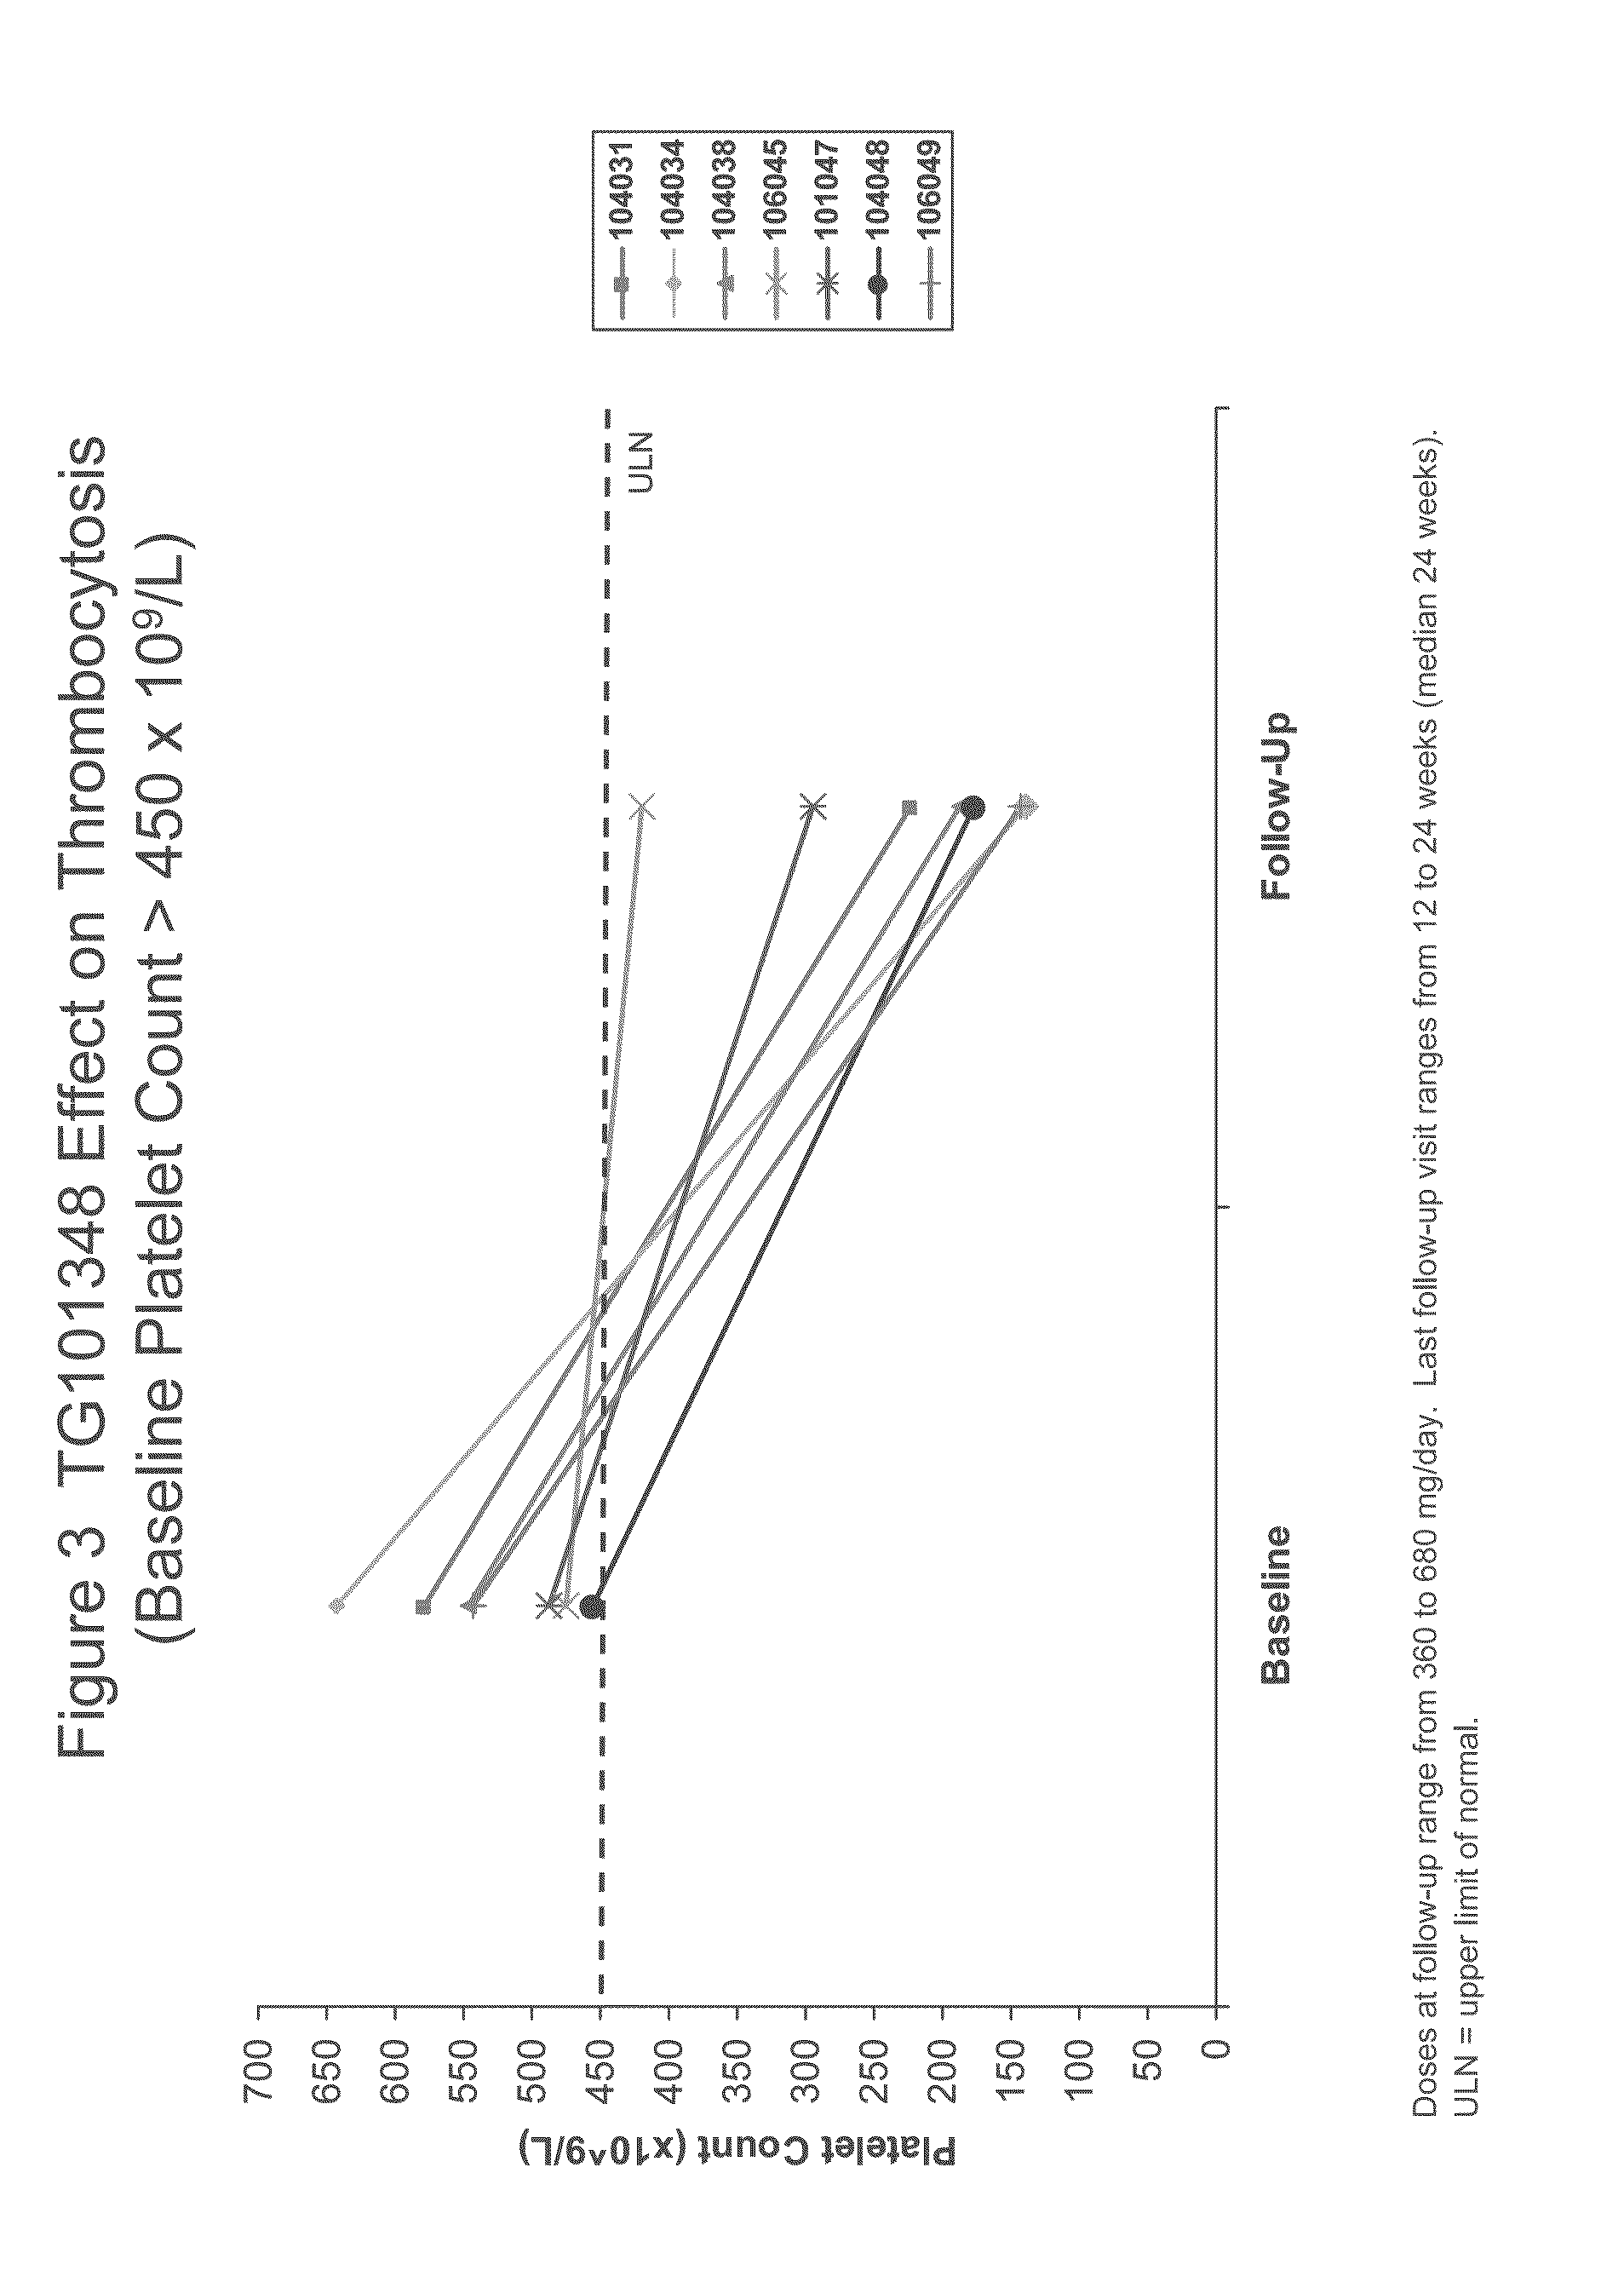 Compositions and methods for treating myelofibrosis